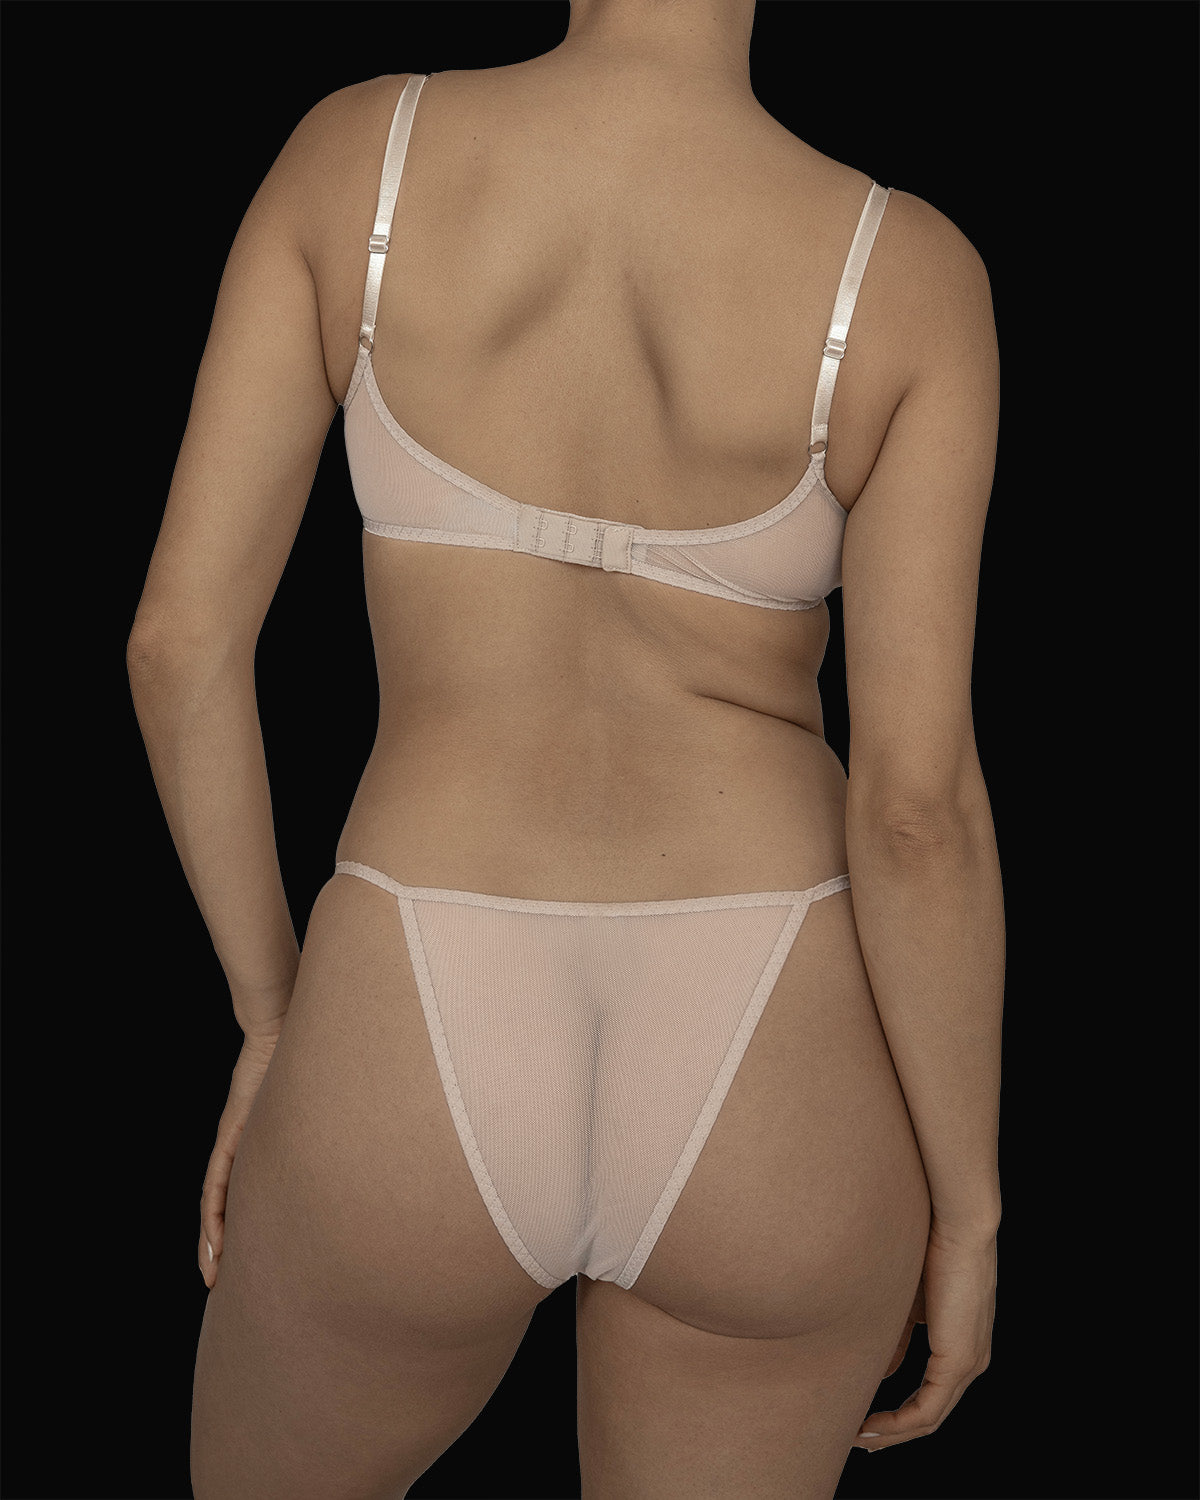 The Kye Intimates Ikebana Bra in the color ecru. A deep scoop neck bra with wide adjustable shoulder straps and an adjustable back clasp. This sheer bra is both dainty and sensual.